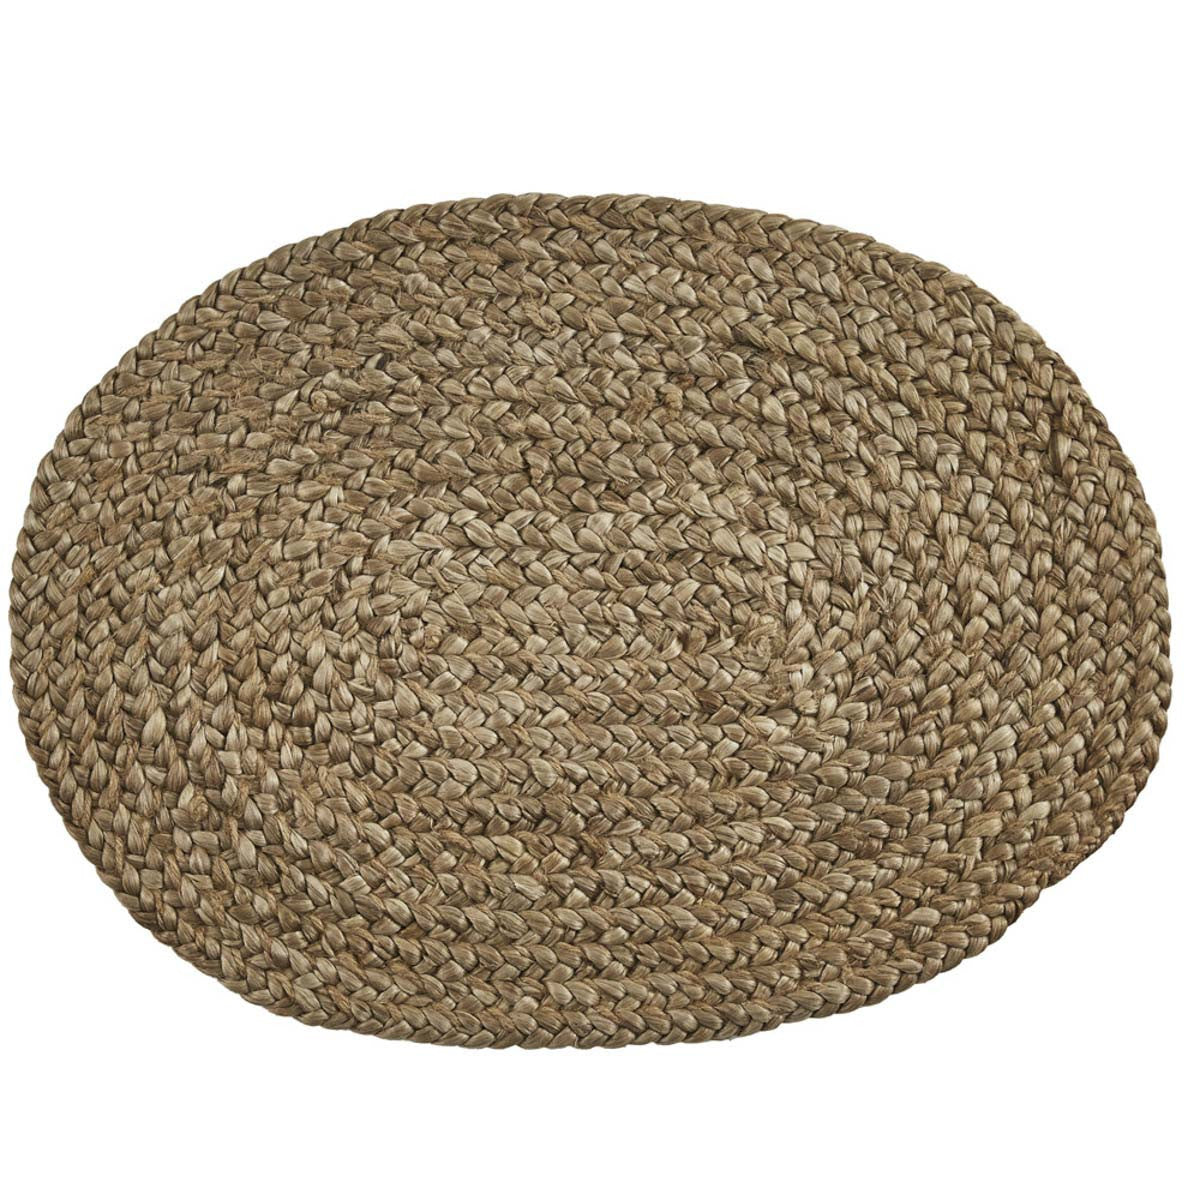 Oval Jute Braided Placemats - Beige Set Of 6 Park Designs